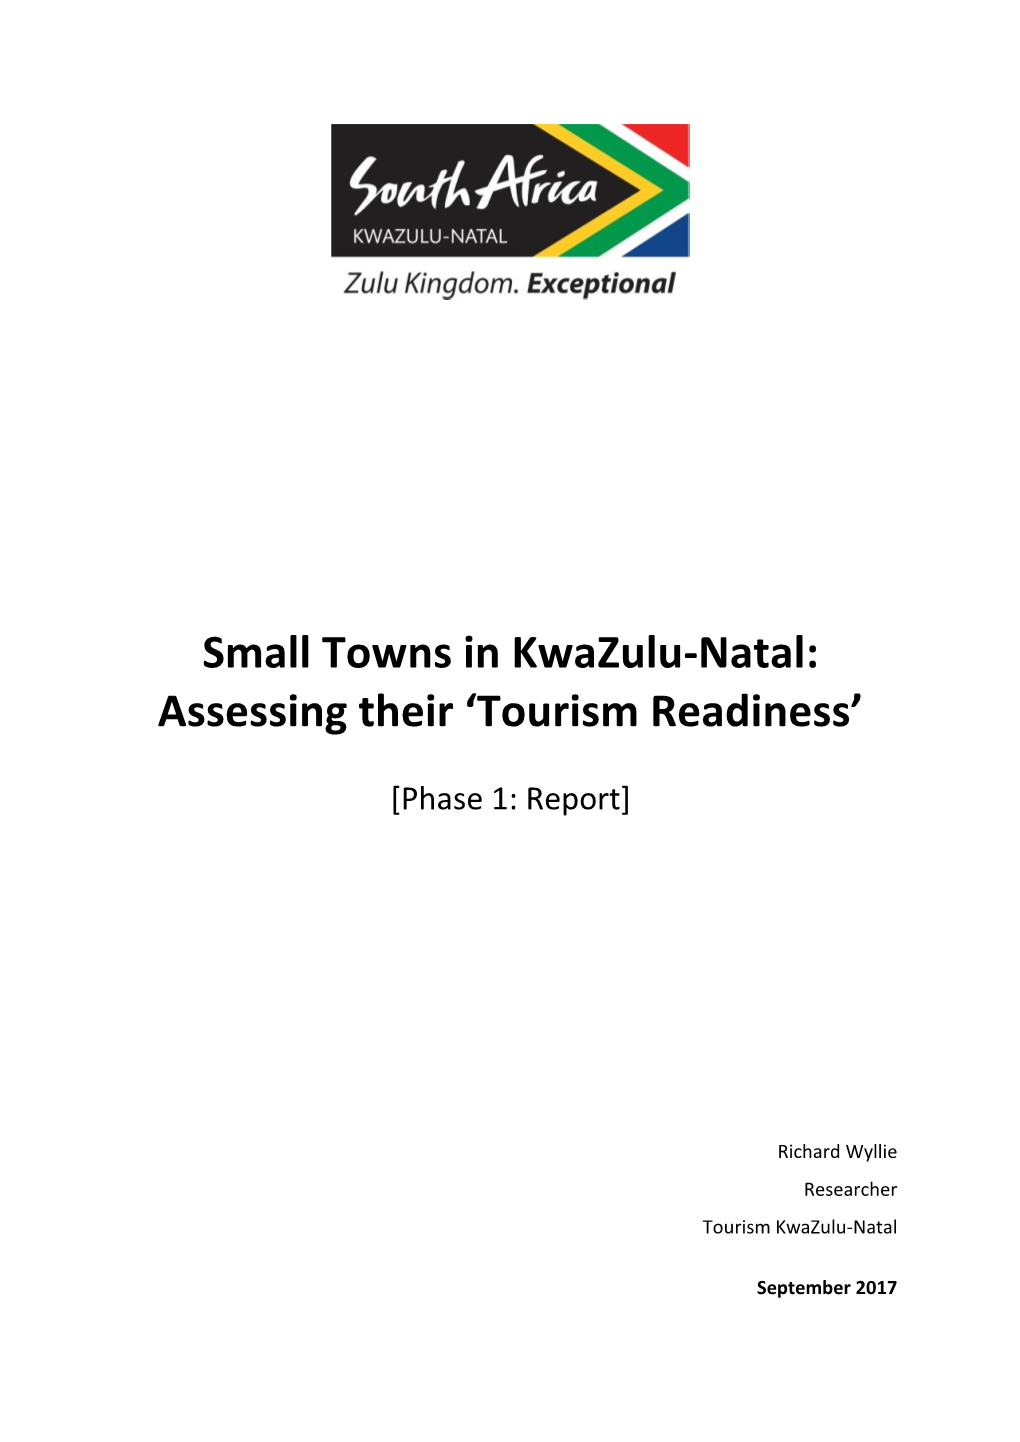 Research Paper No.255-Phase 1 Report Small Towns in KZN 2017